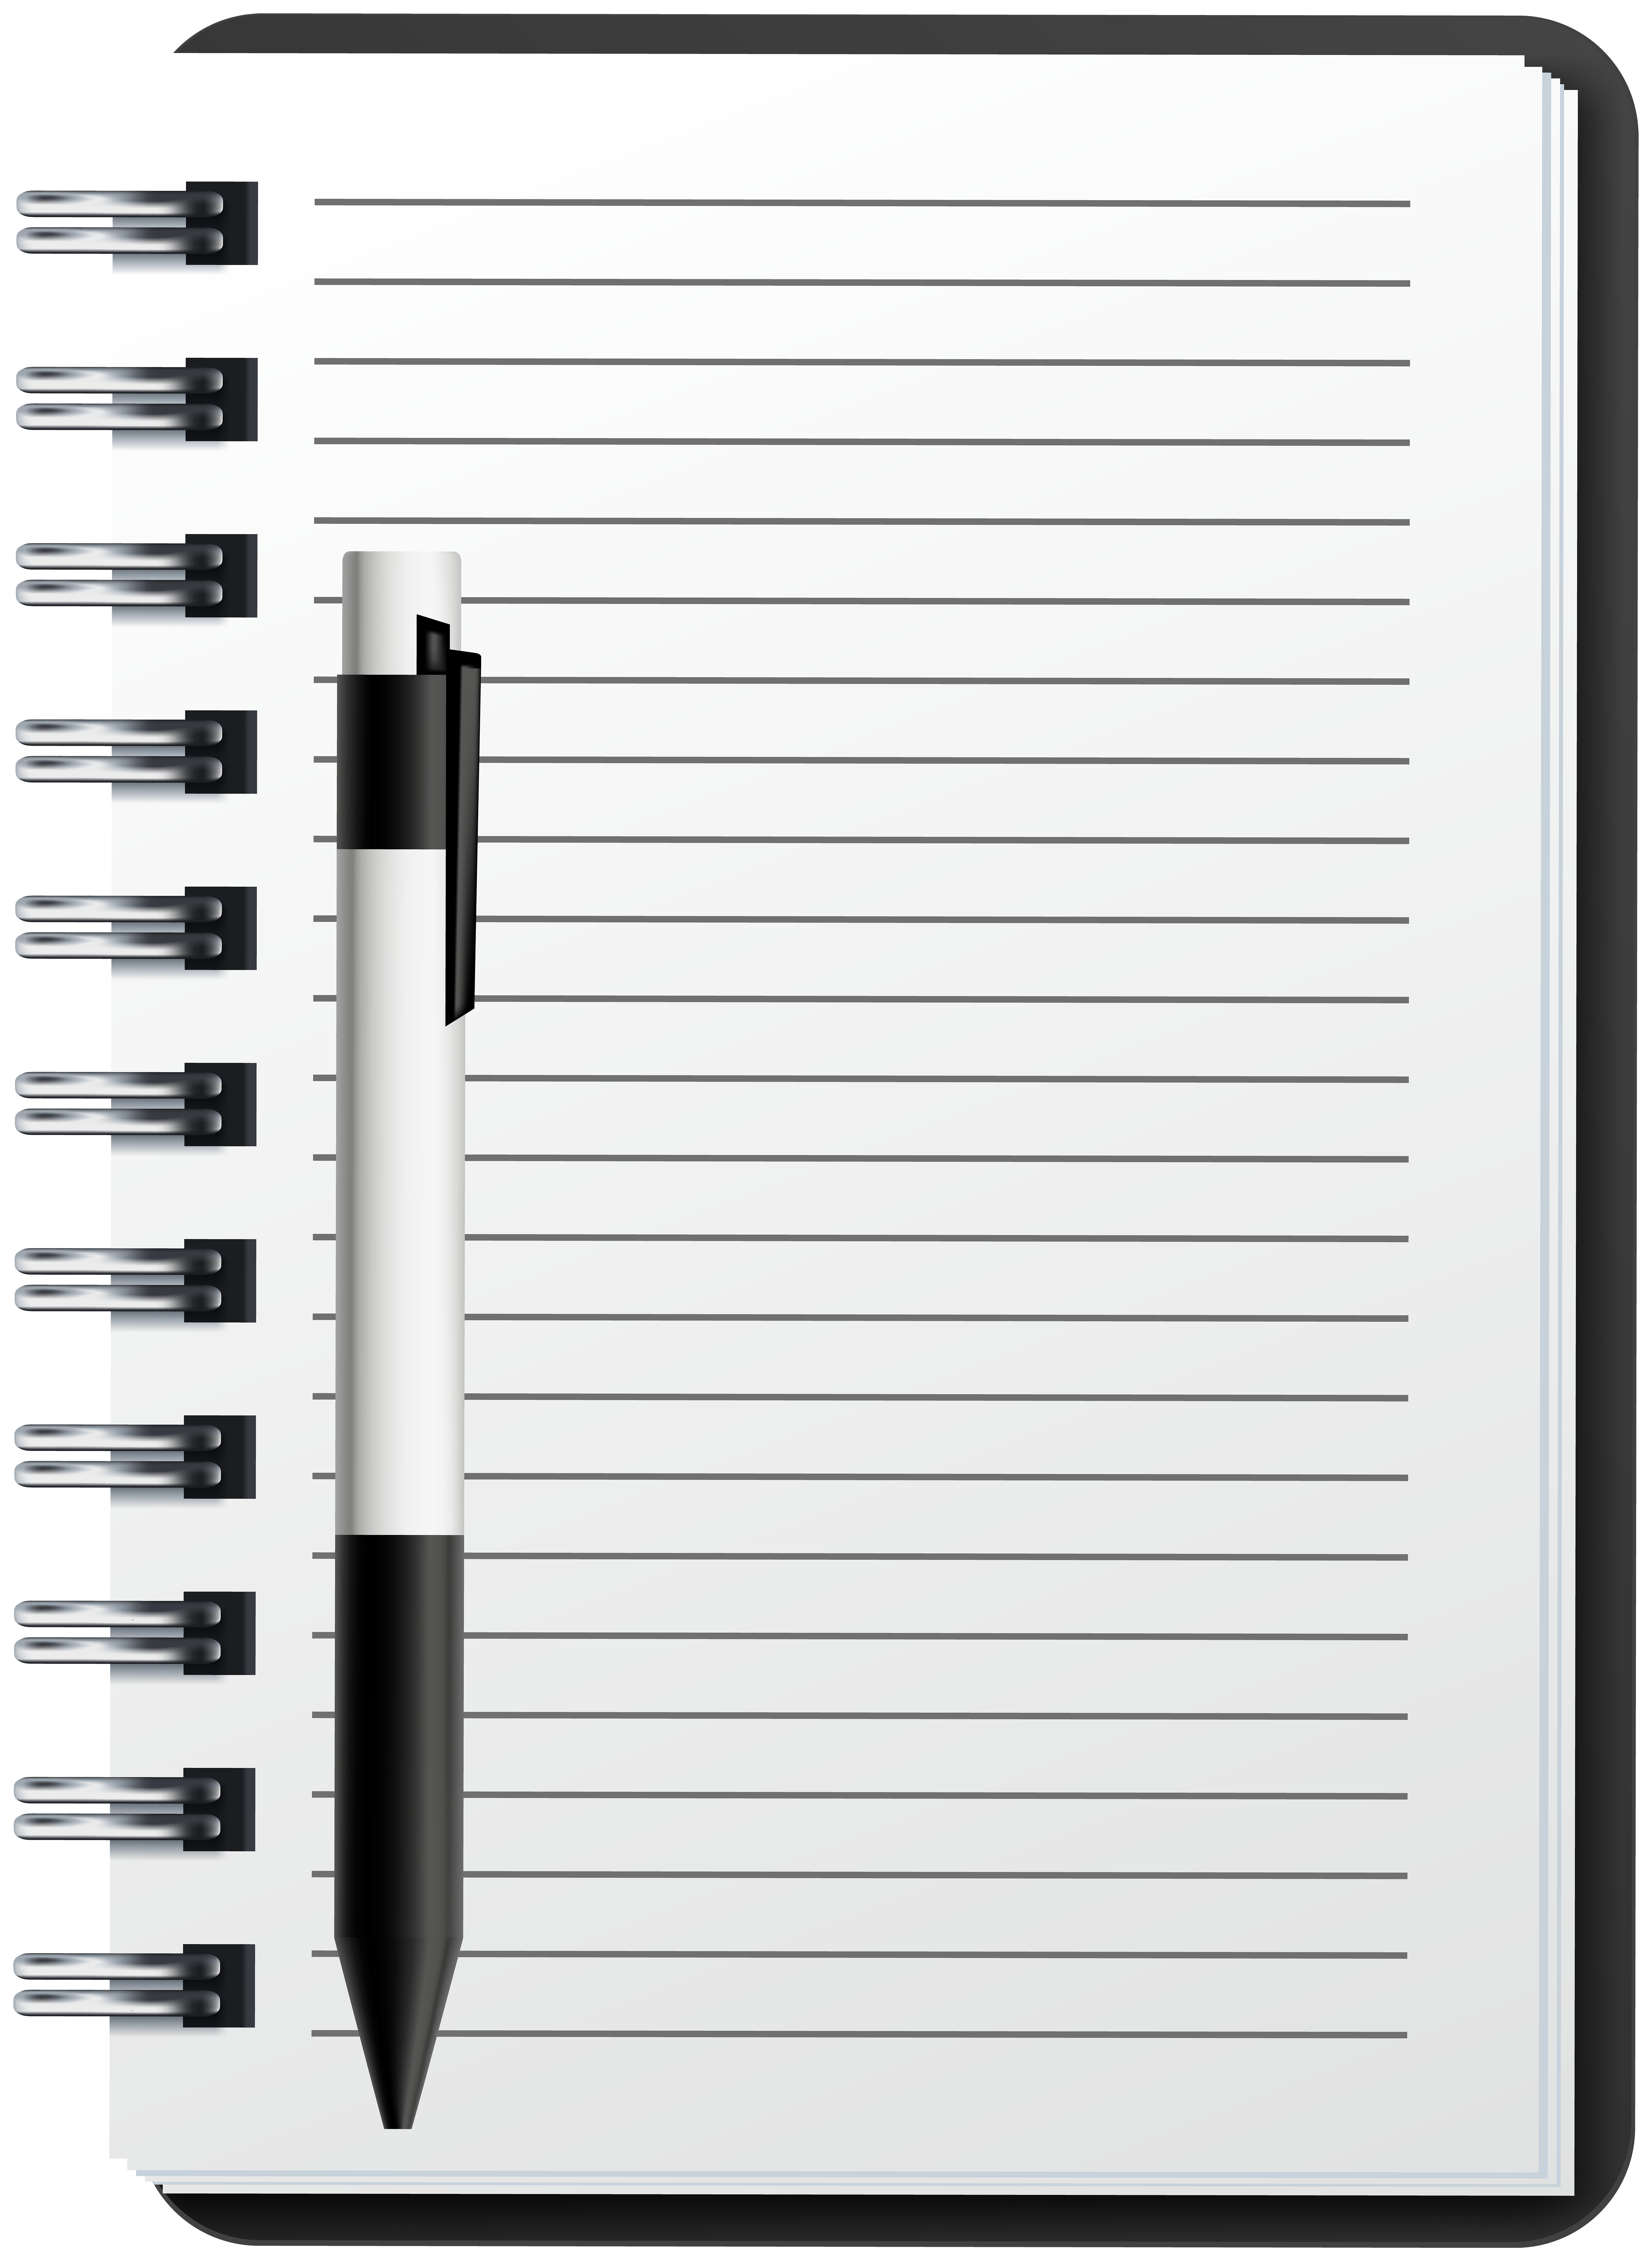 Notebook And Pen Png Clip Art Image Gallery Yopriceville High Quality Images And Transparent Png Free Clipart